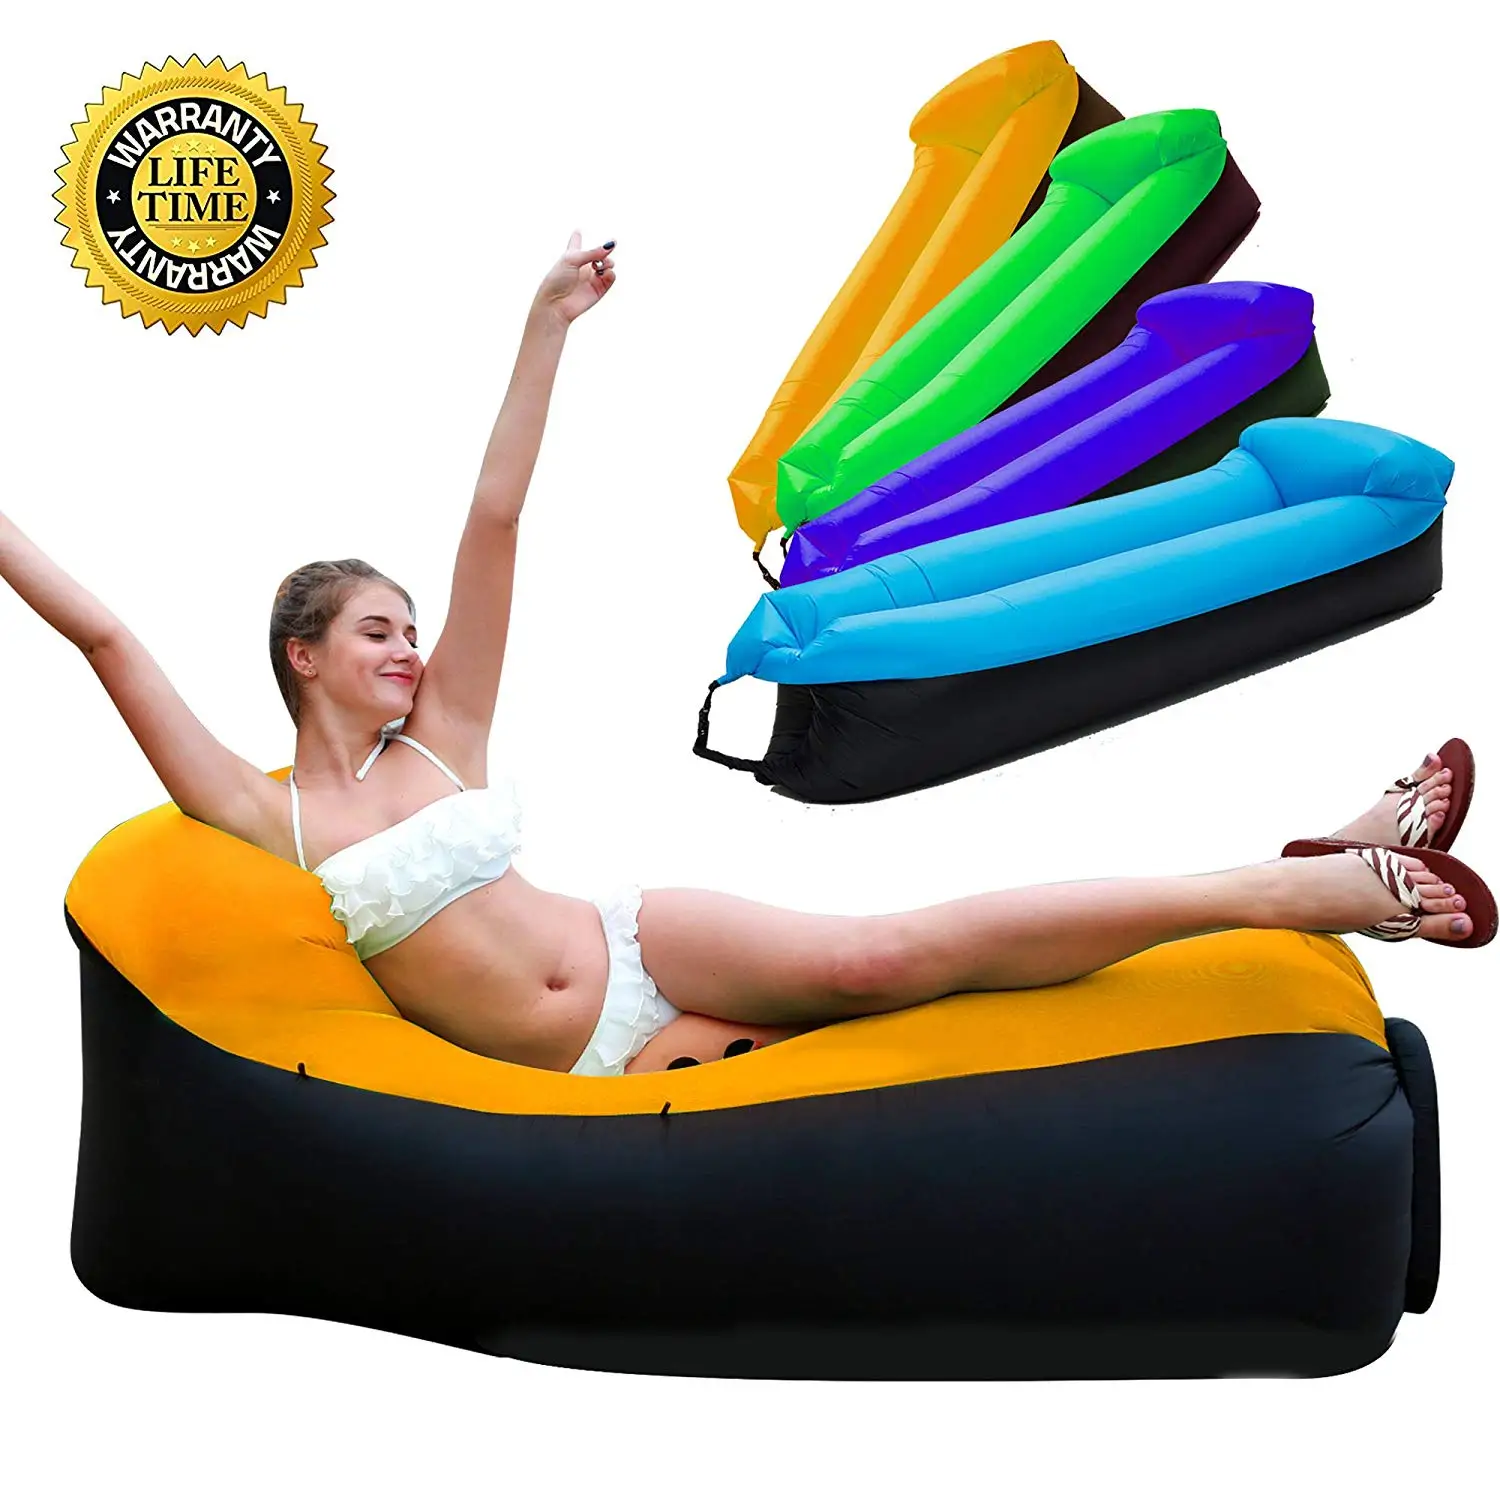 HAKE Inflatable Lounger Inflatable Couch Air Lounger Air Couch Water Resist...